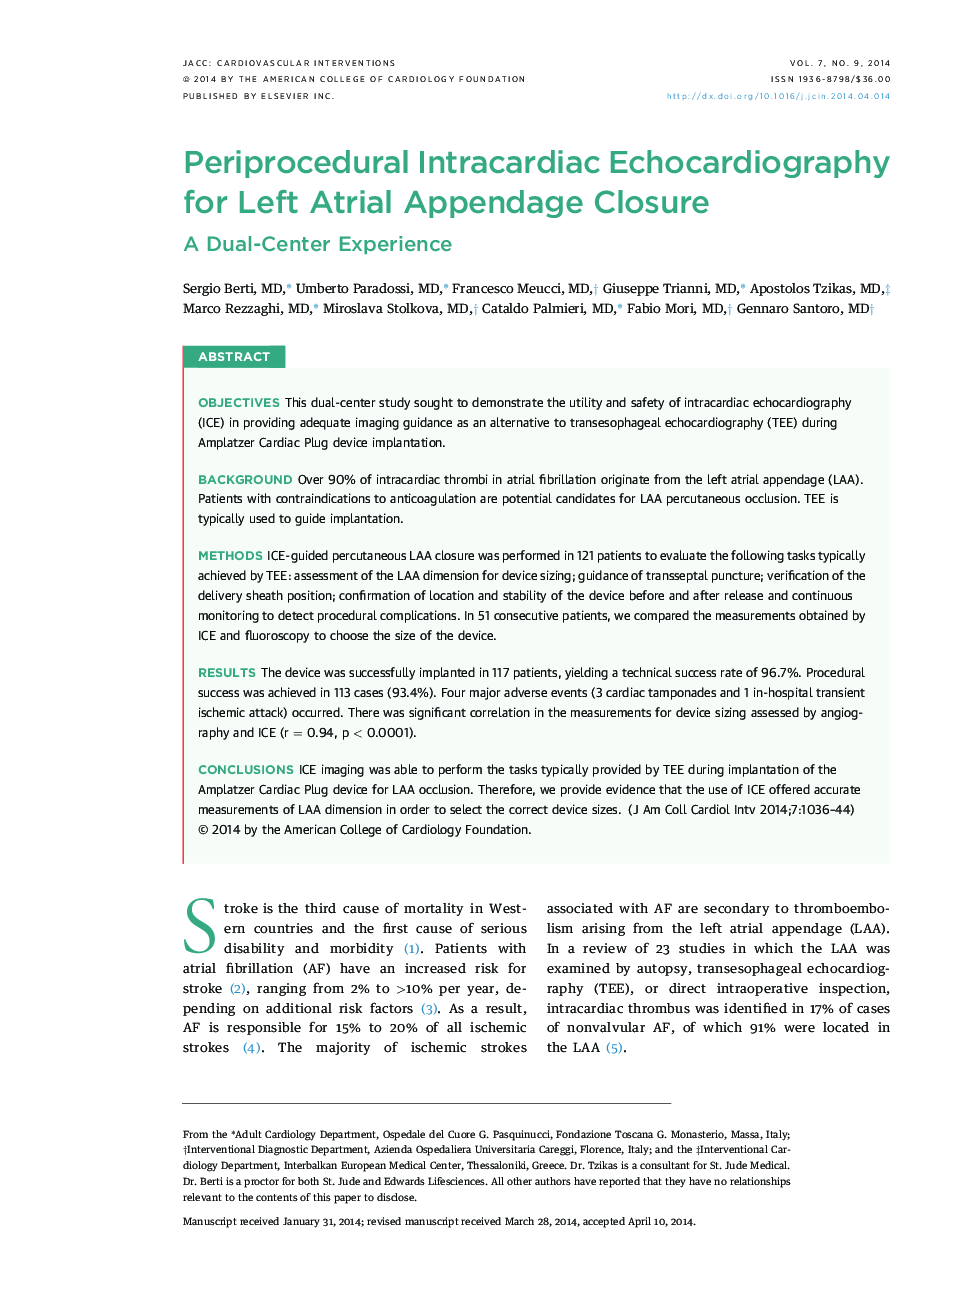 Periprocedural Intracardiac Echocardiography for Left Atrial Appendage Closure : A Dual-Center Experience